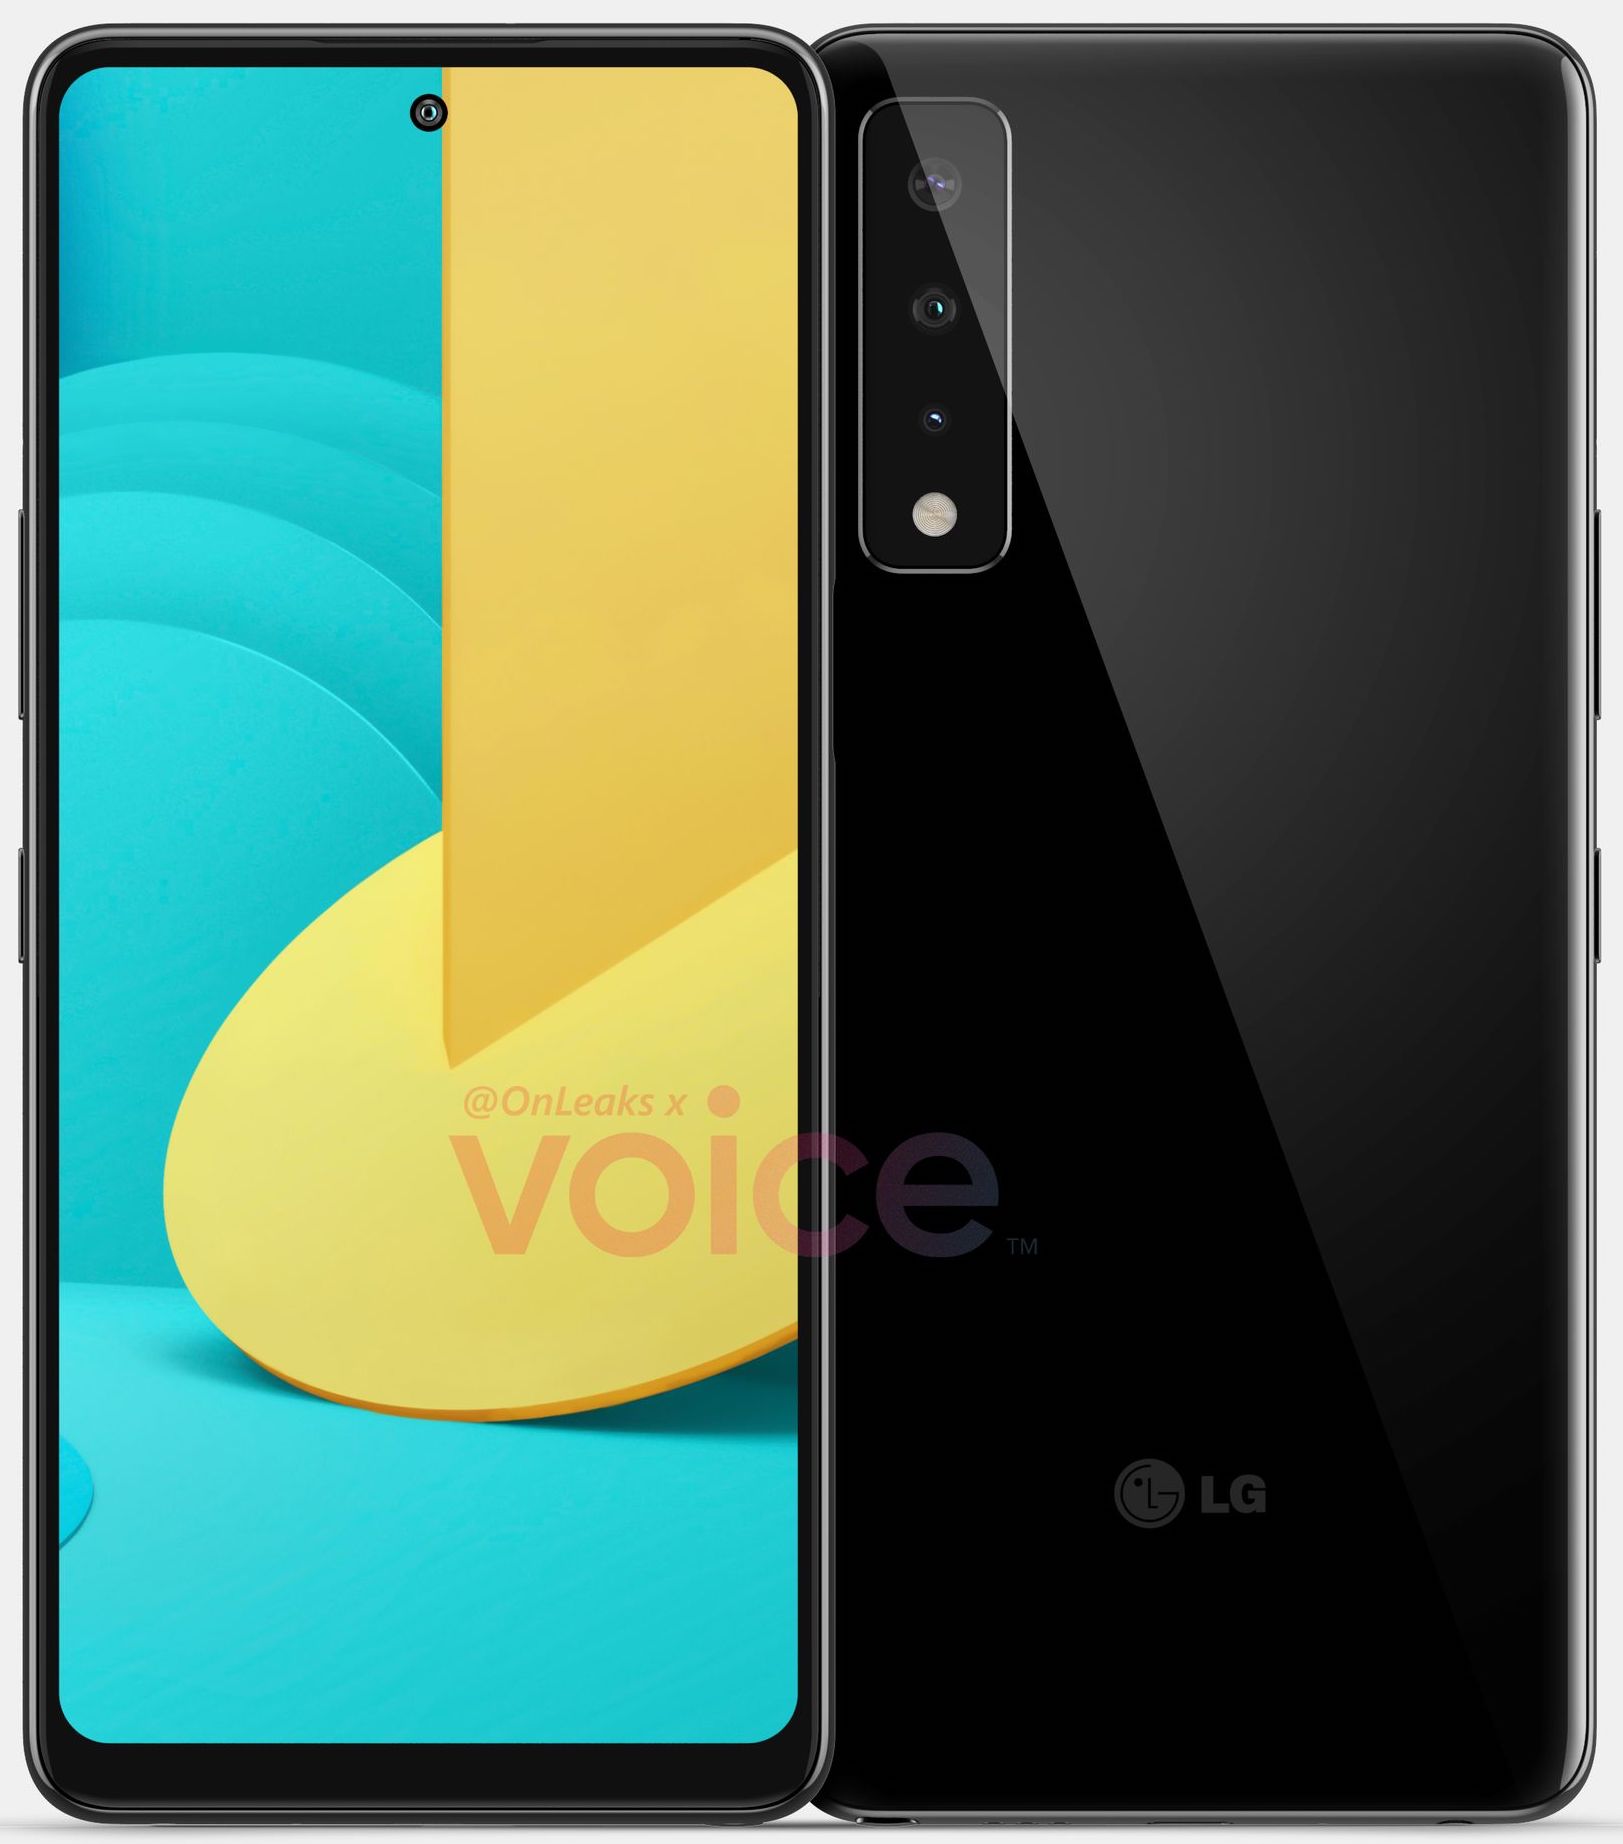 LG Stylo 7 specifications and images have been leaked